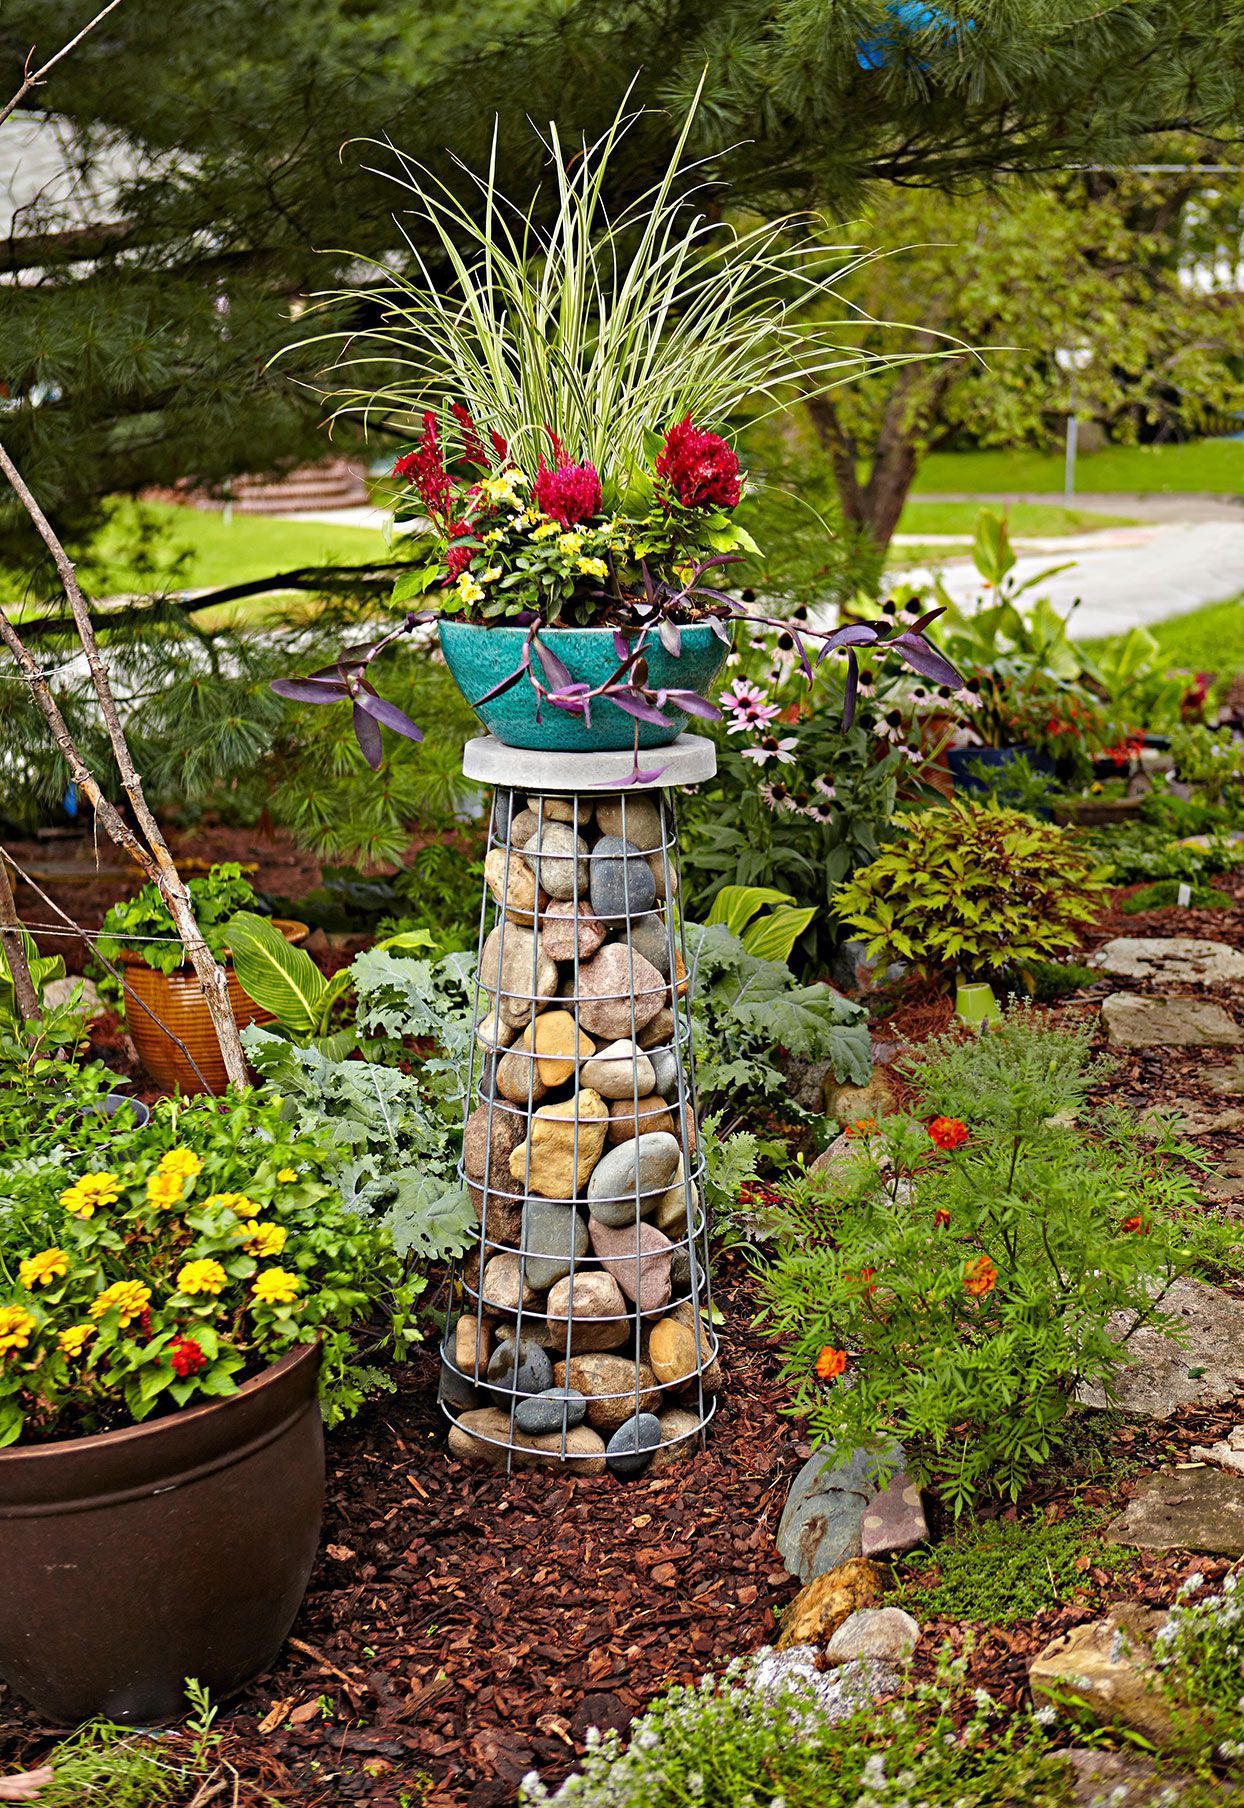 How To Build A Gabion Plant Stand That Will Add A Statement Vertical Accent  To Your Garden | Garden Plant Stand, Garden Art, Container Gardening Intended For Stone Plant Stands (View 4 of 15)